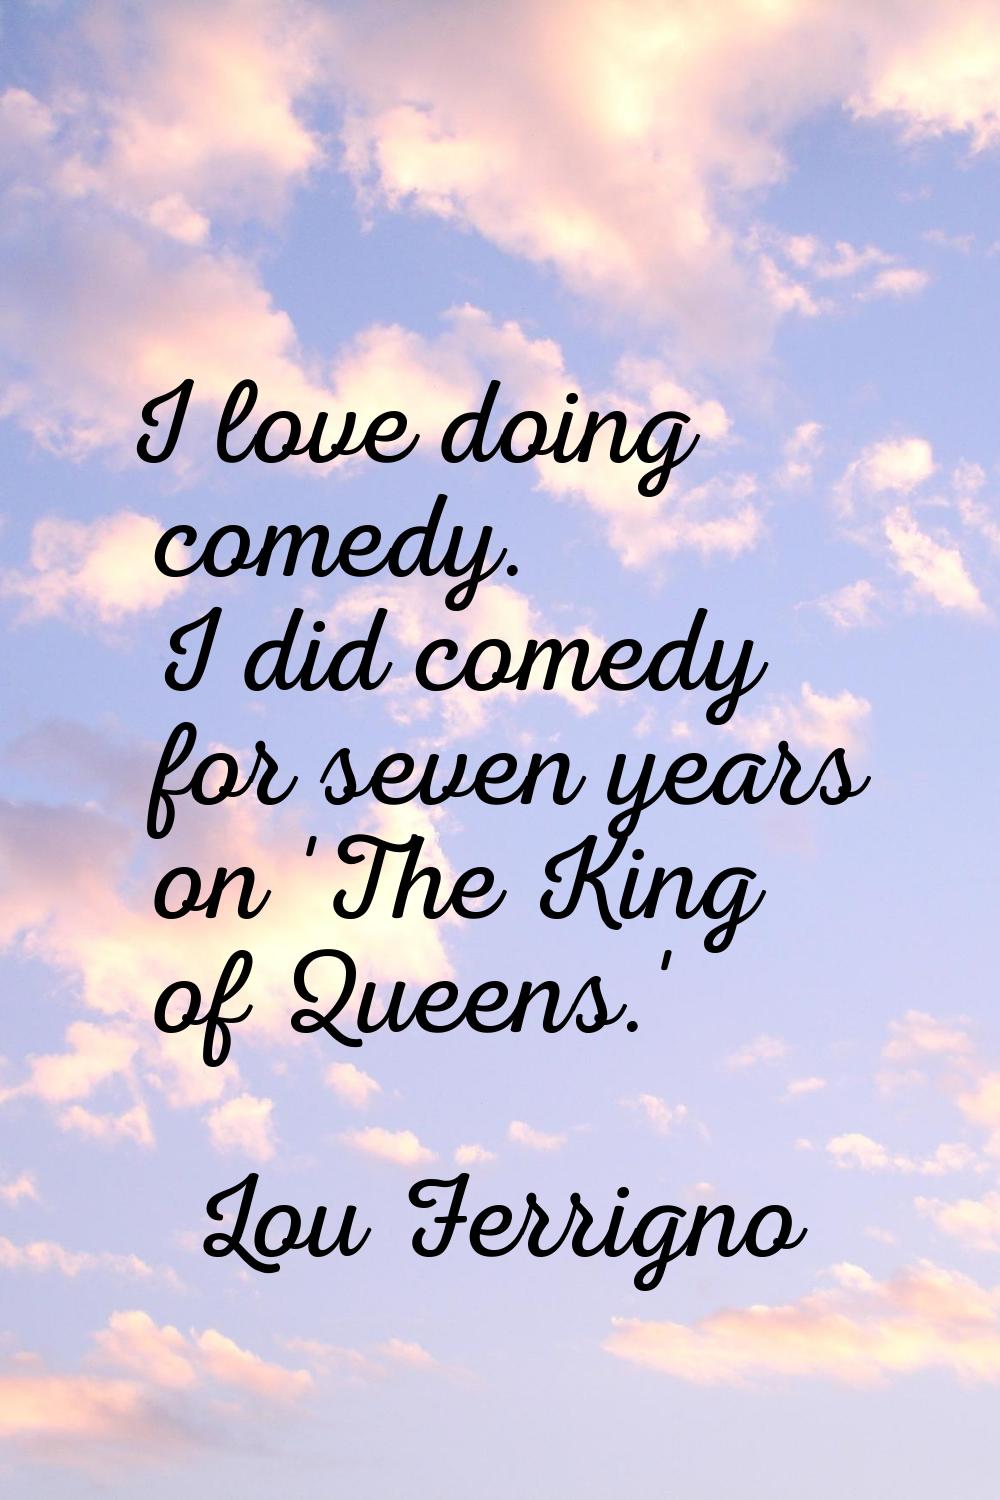 I love doing comedy. I did comedy for seven years on 'The King of Queens.'